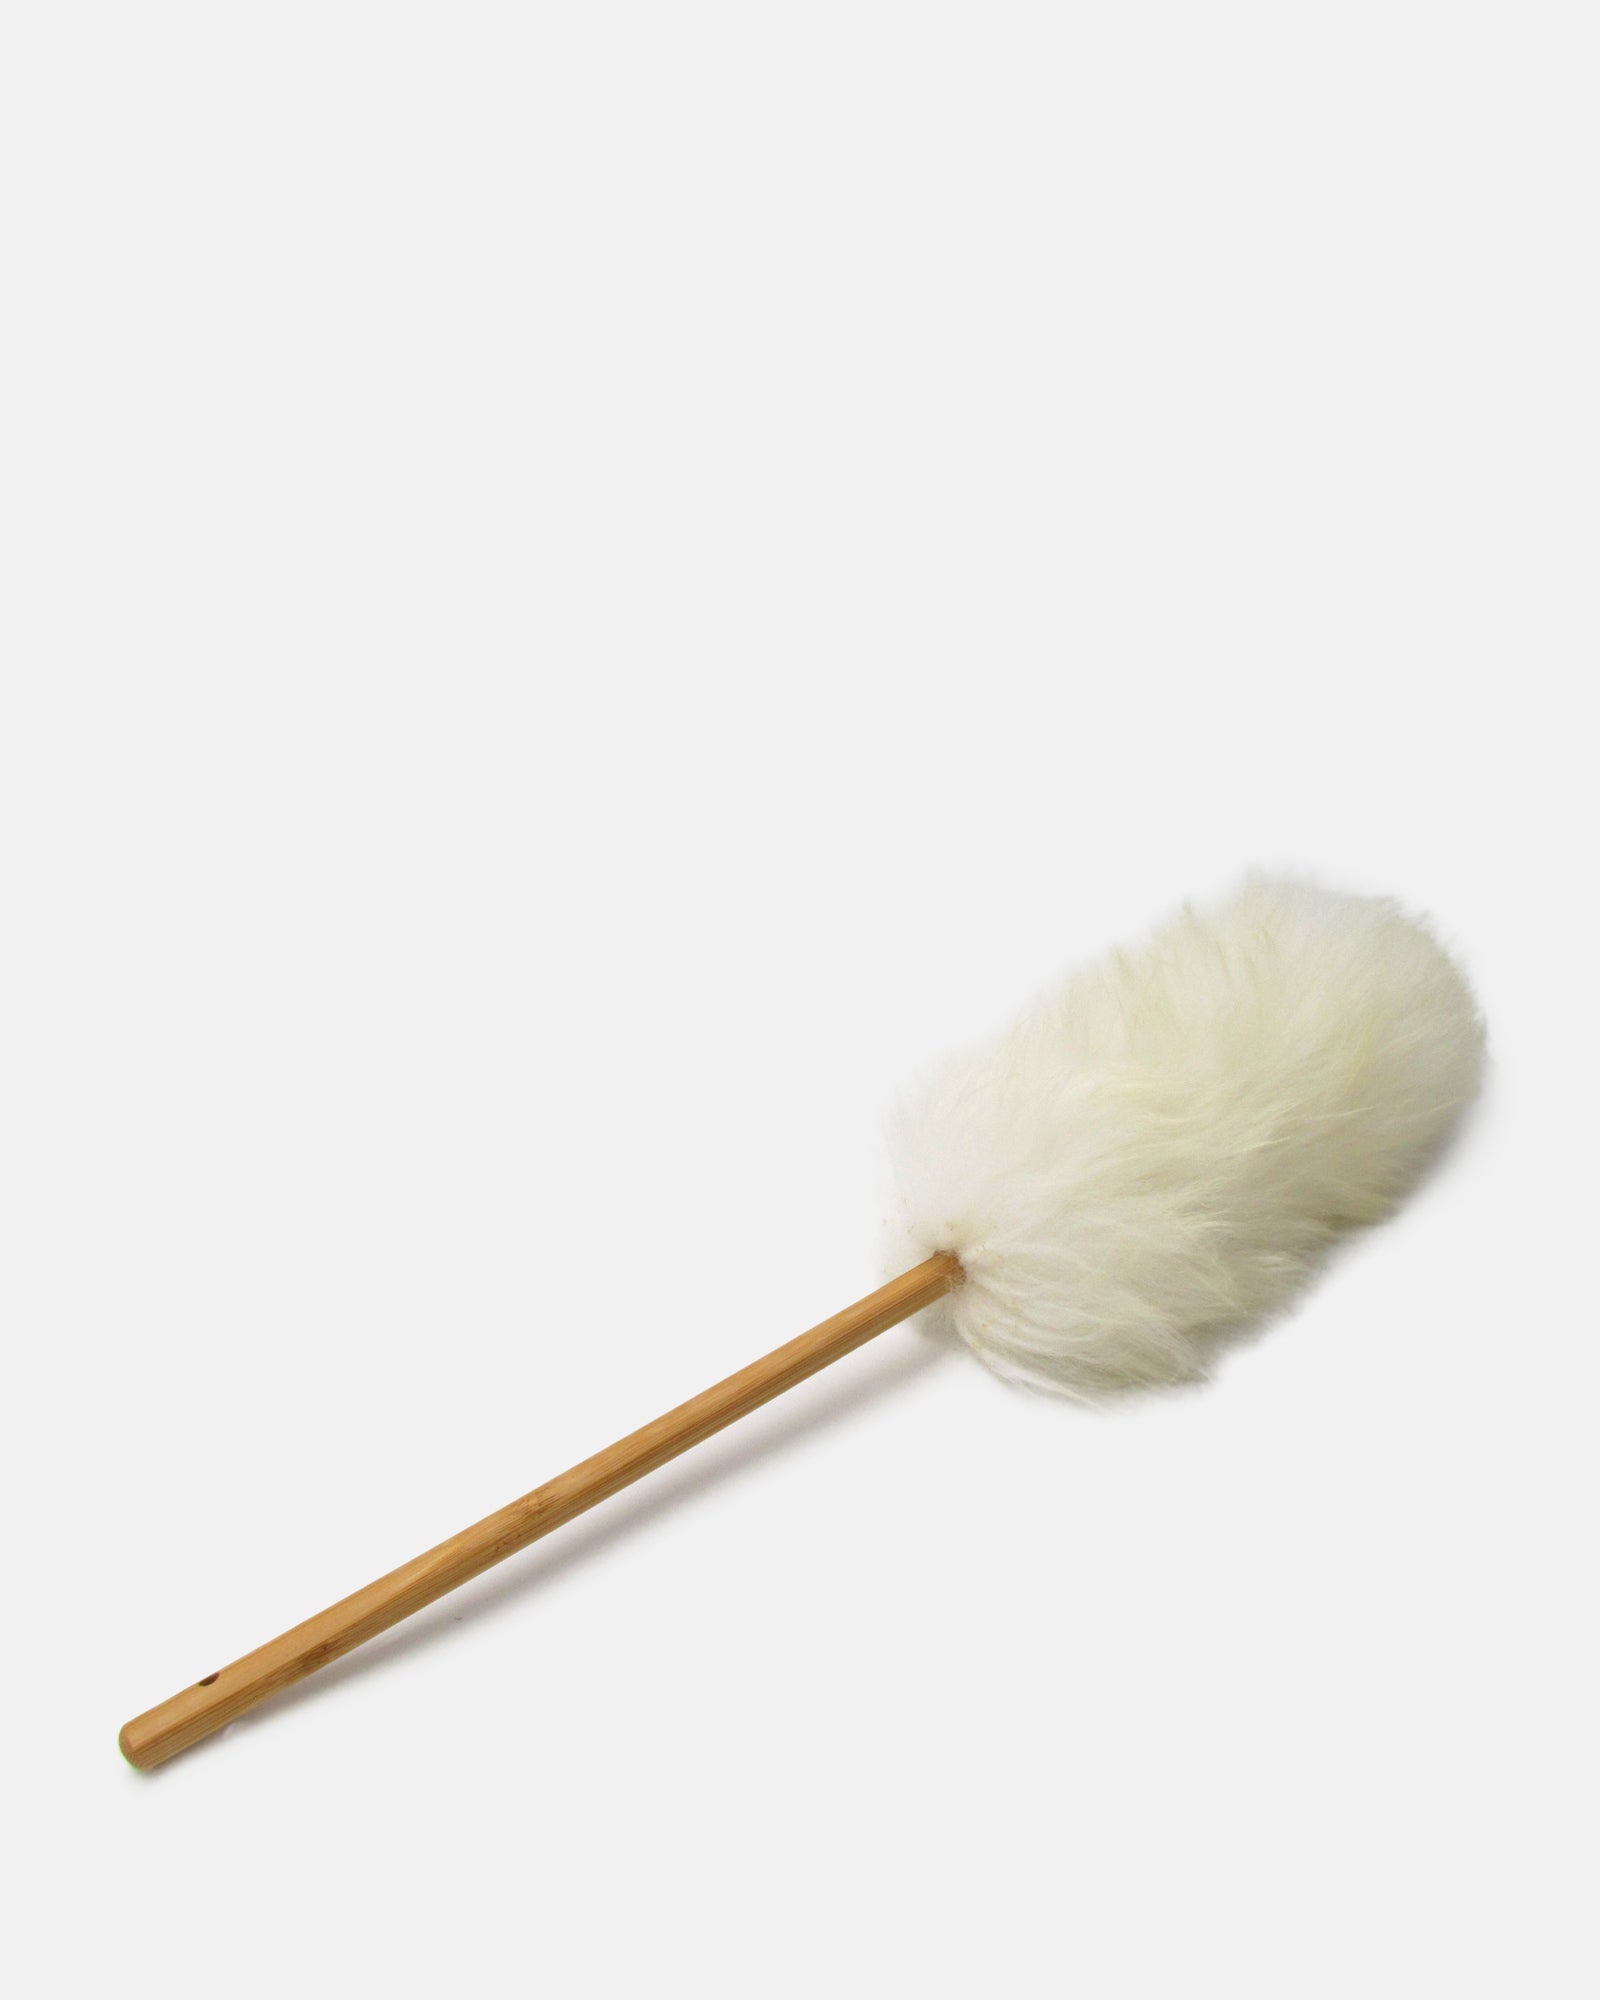 Lambswool Duster with Wooden Handle | Brit Locker